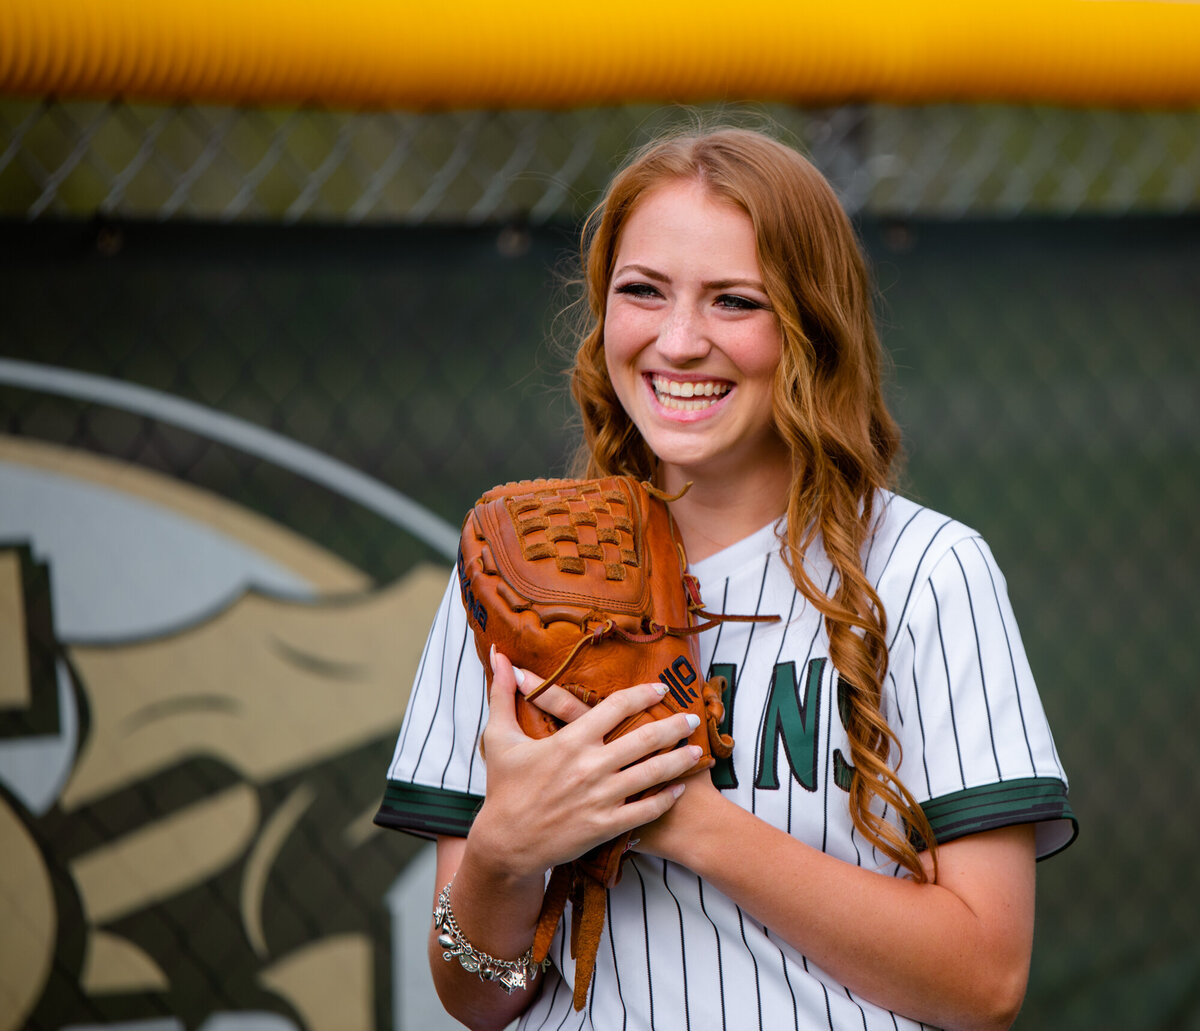 A high school senior stands in a softball outfield near the fence and holds her glove near her chest while smiling.